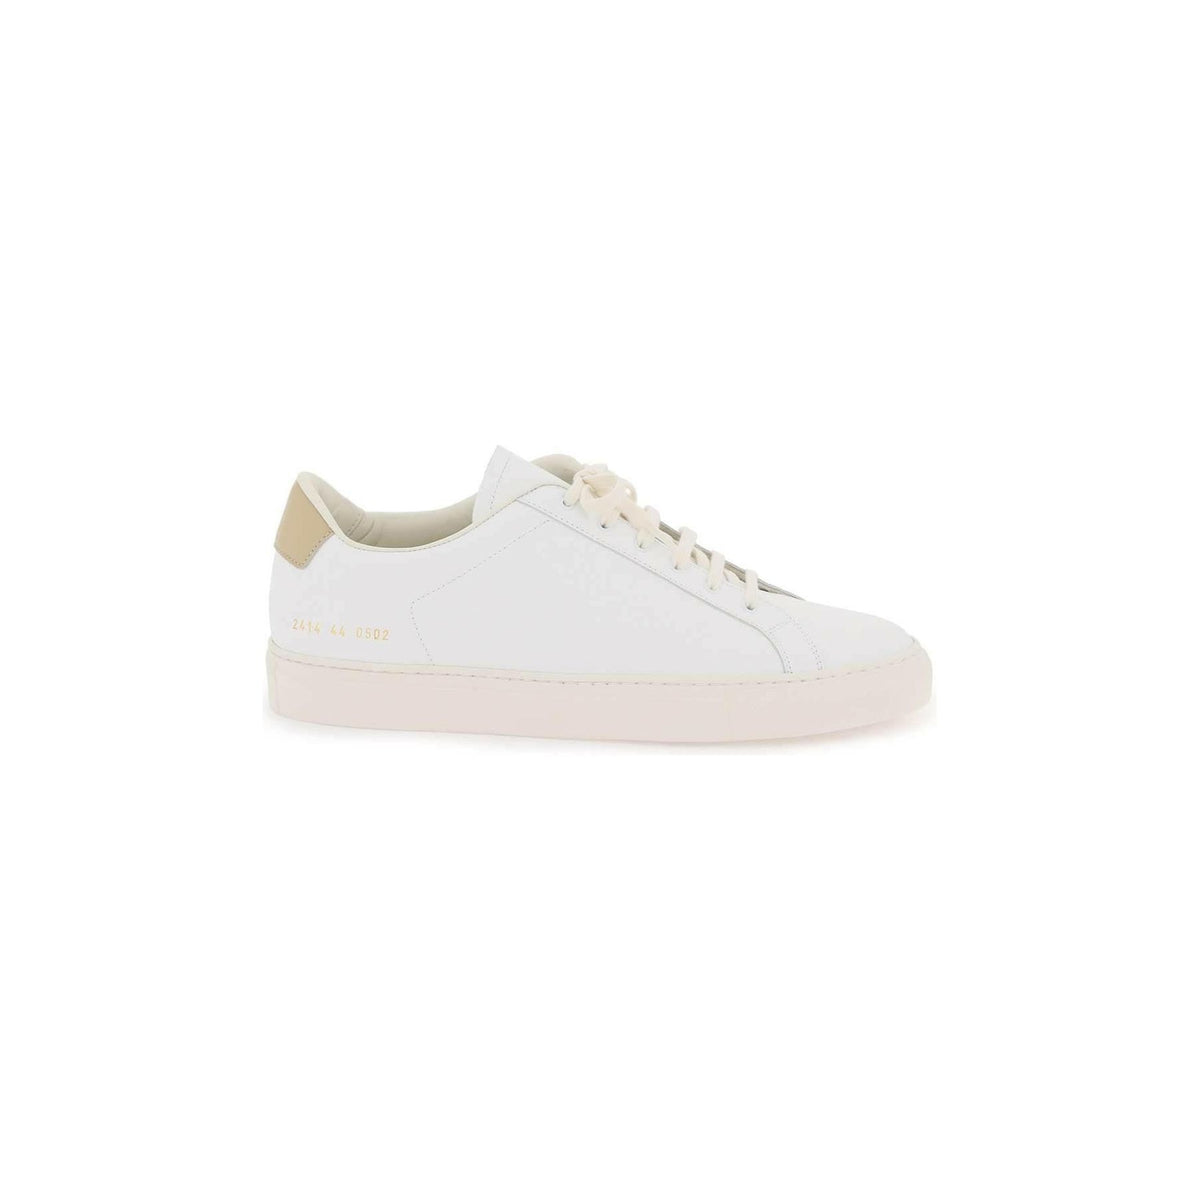 White Tan Retro Low-Top Leather Sneakers COMMON PROJECTS JOHN JULIA.